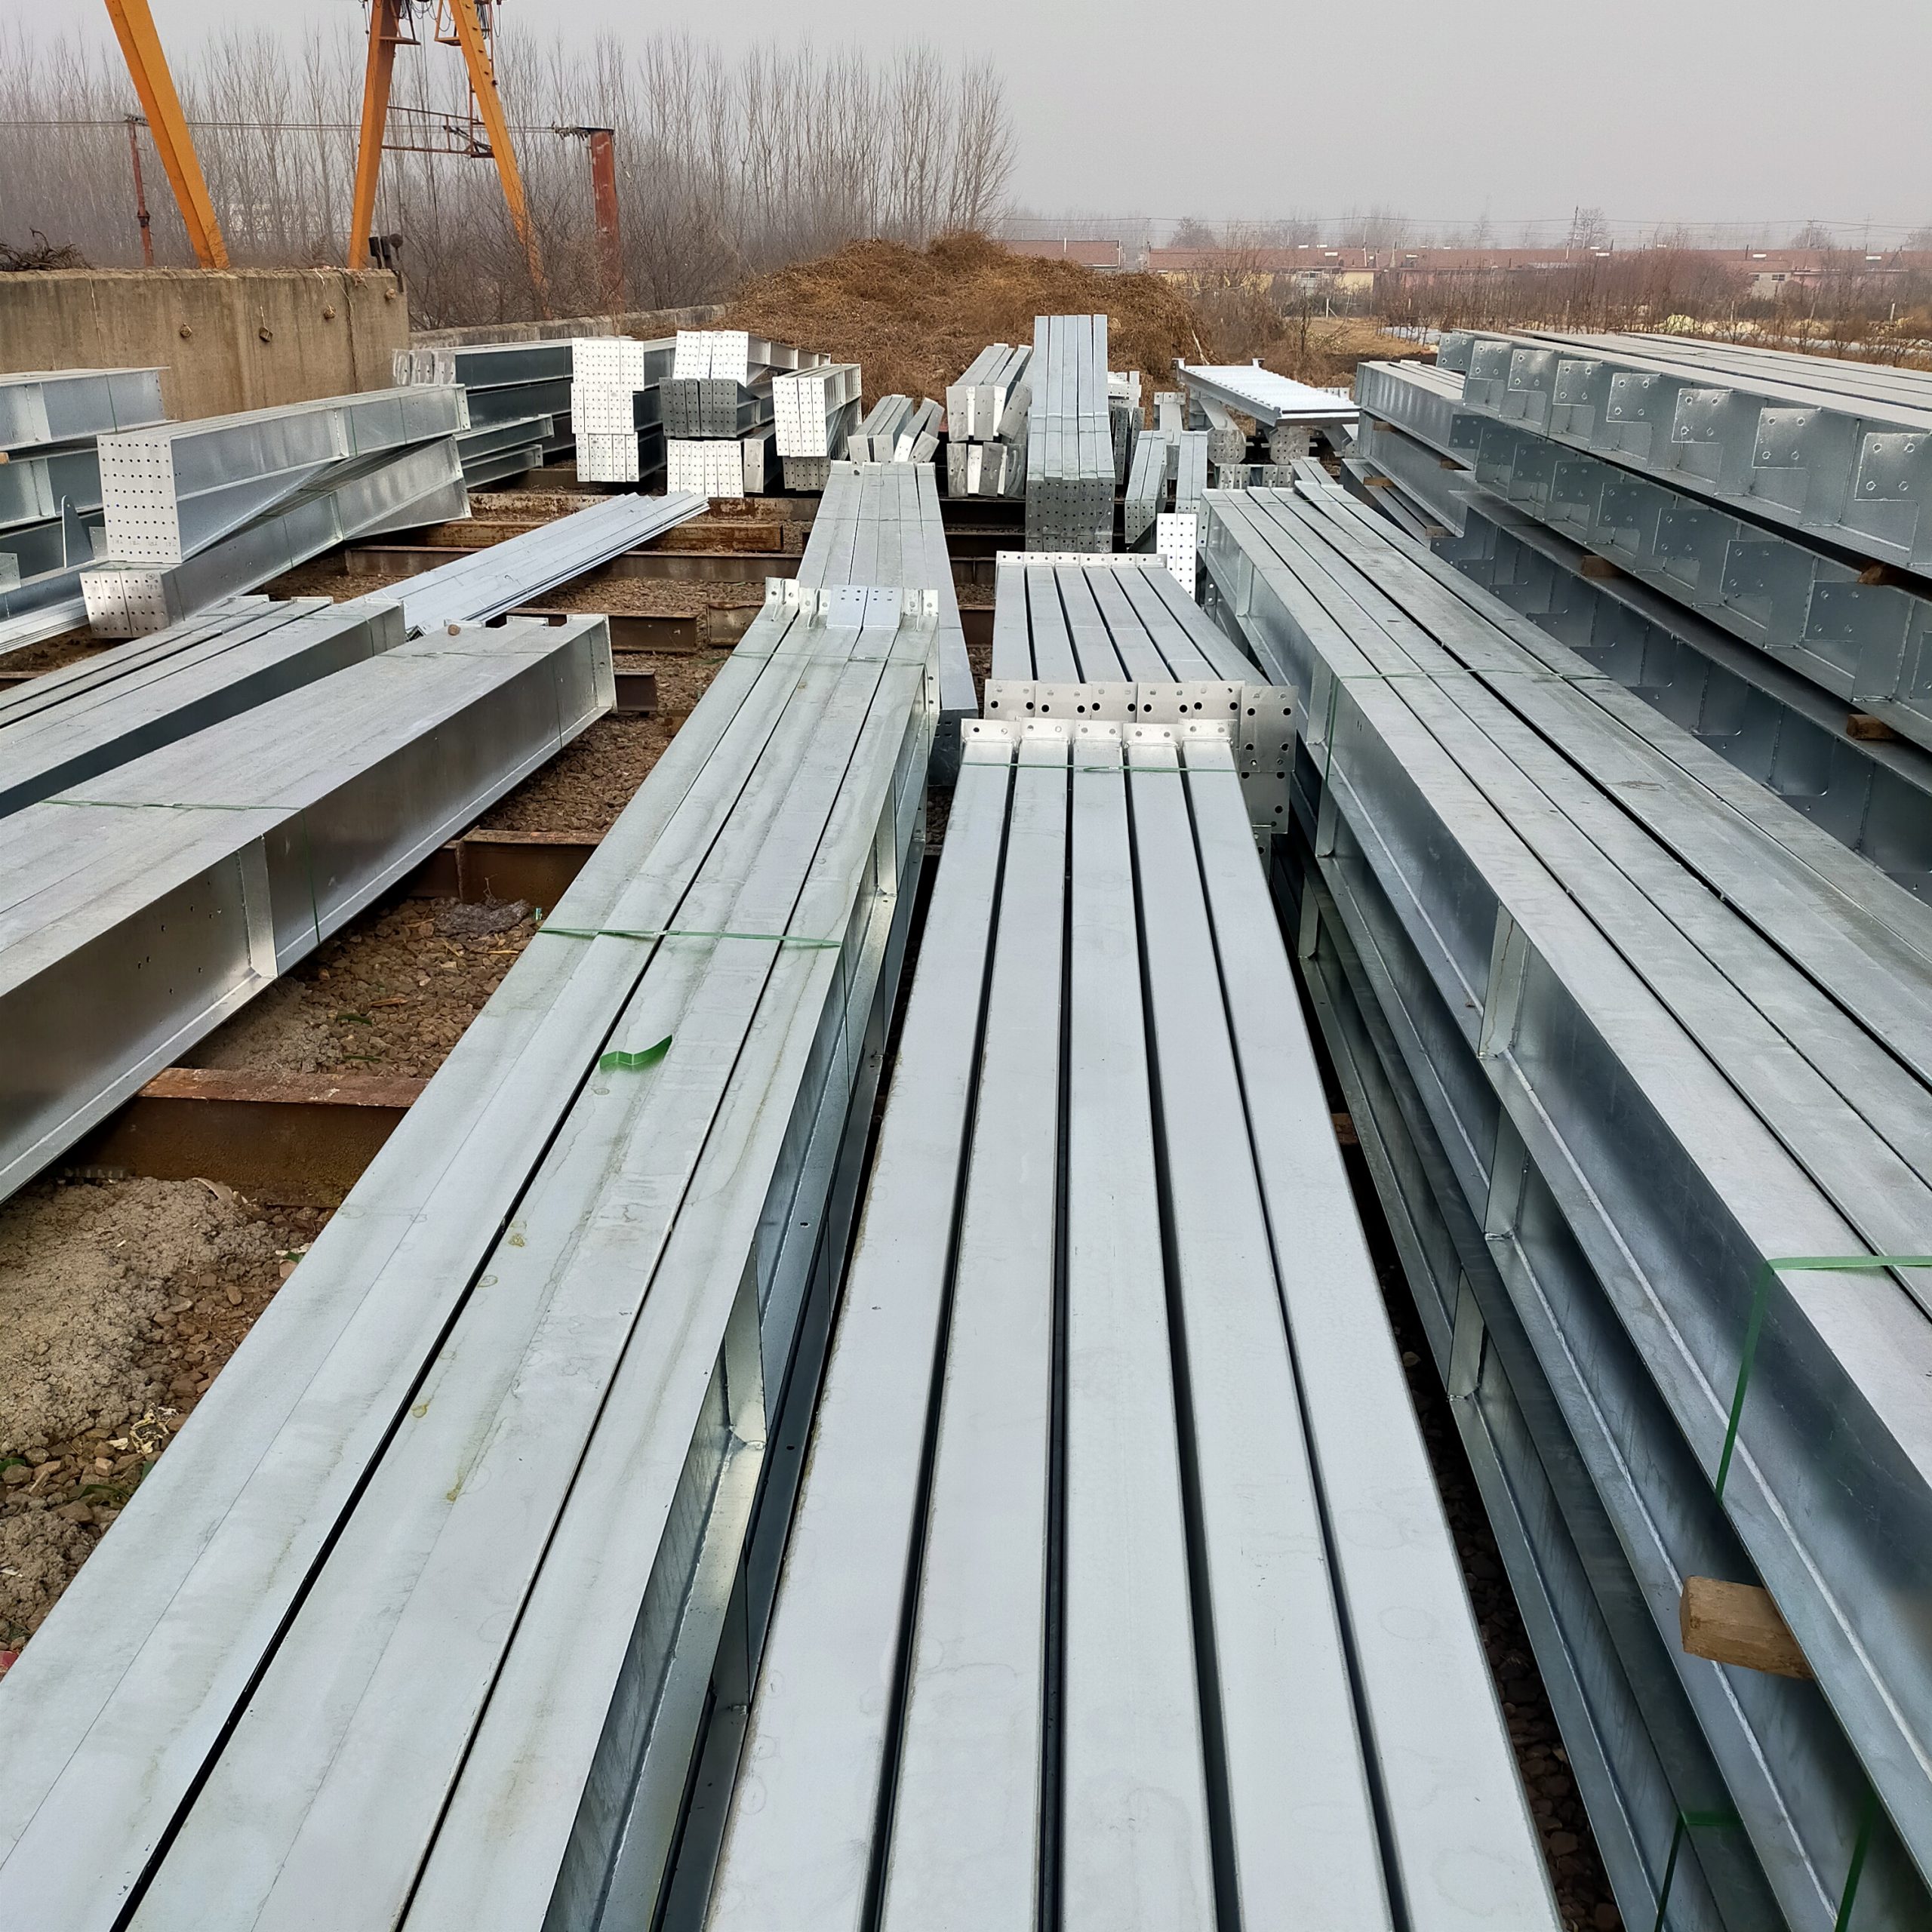   Hot dip galvanized Steel structure processing in China，China Steel structure manufacturing